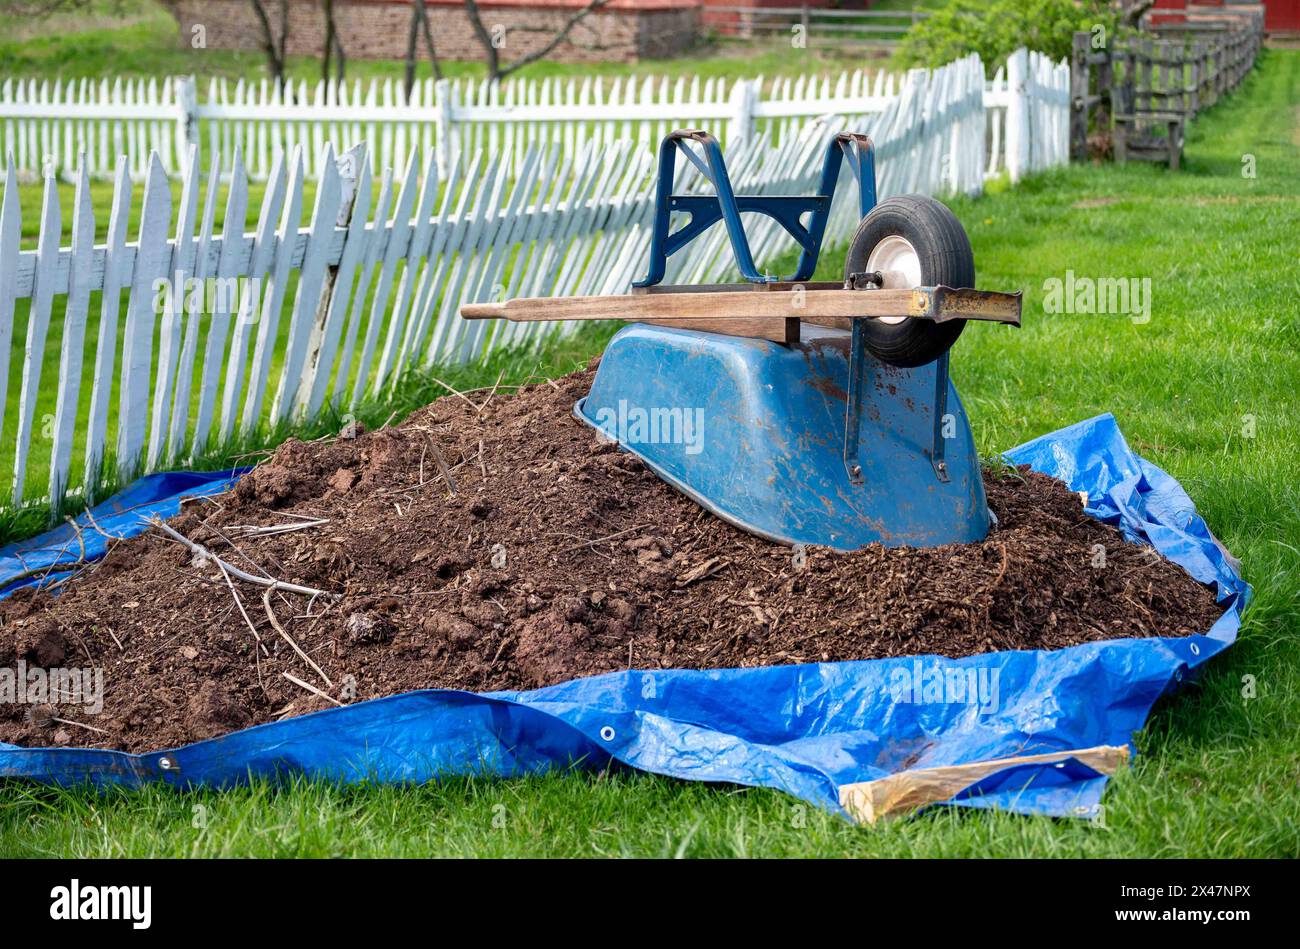 Beautiful rustic grass and white picket fence with a pile of garden soil on an outstretched blue tarp and an upturned weathered blue metal wheelbarrow Stock Photo